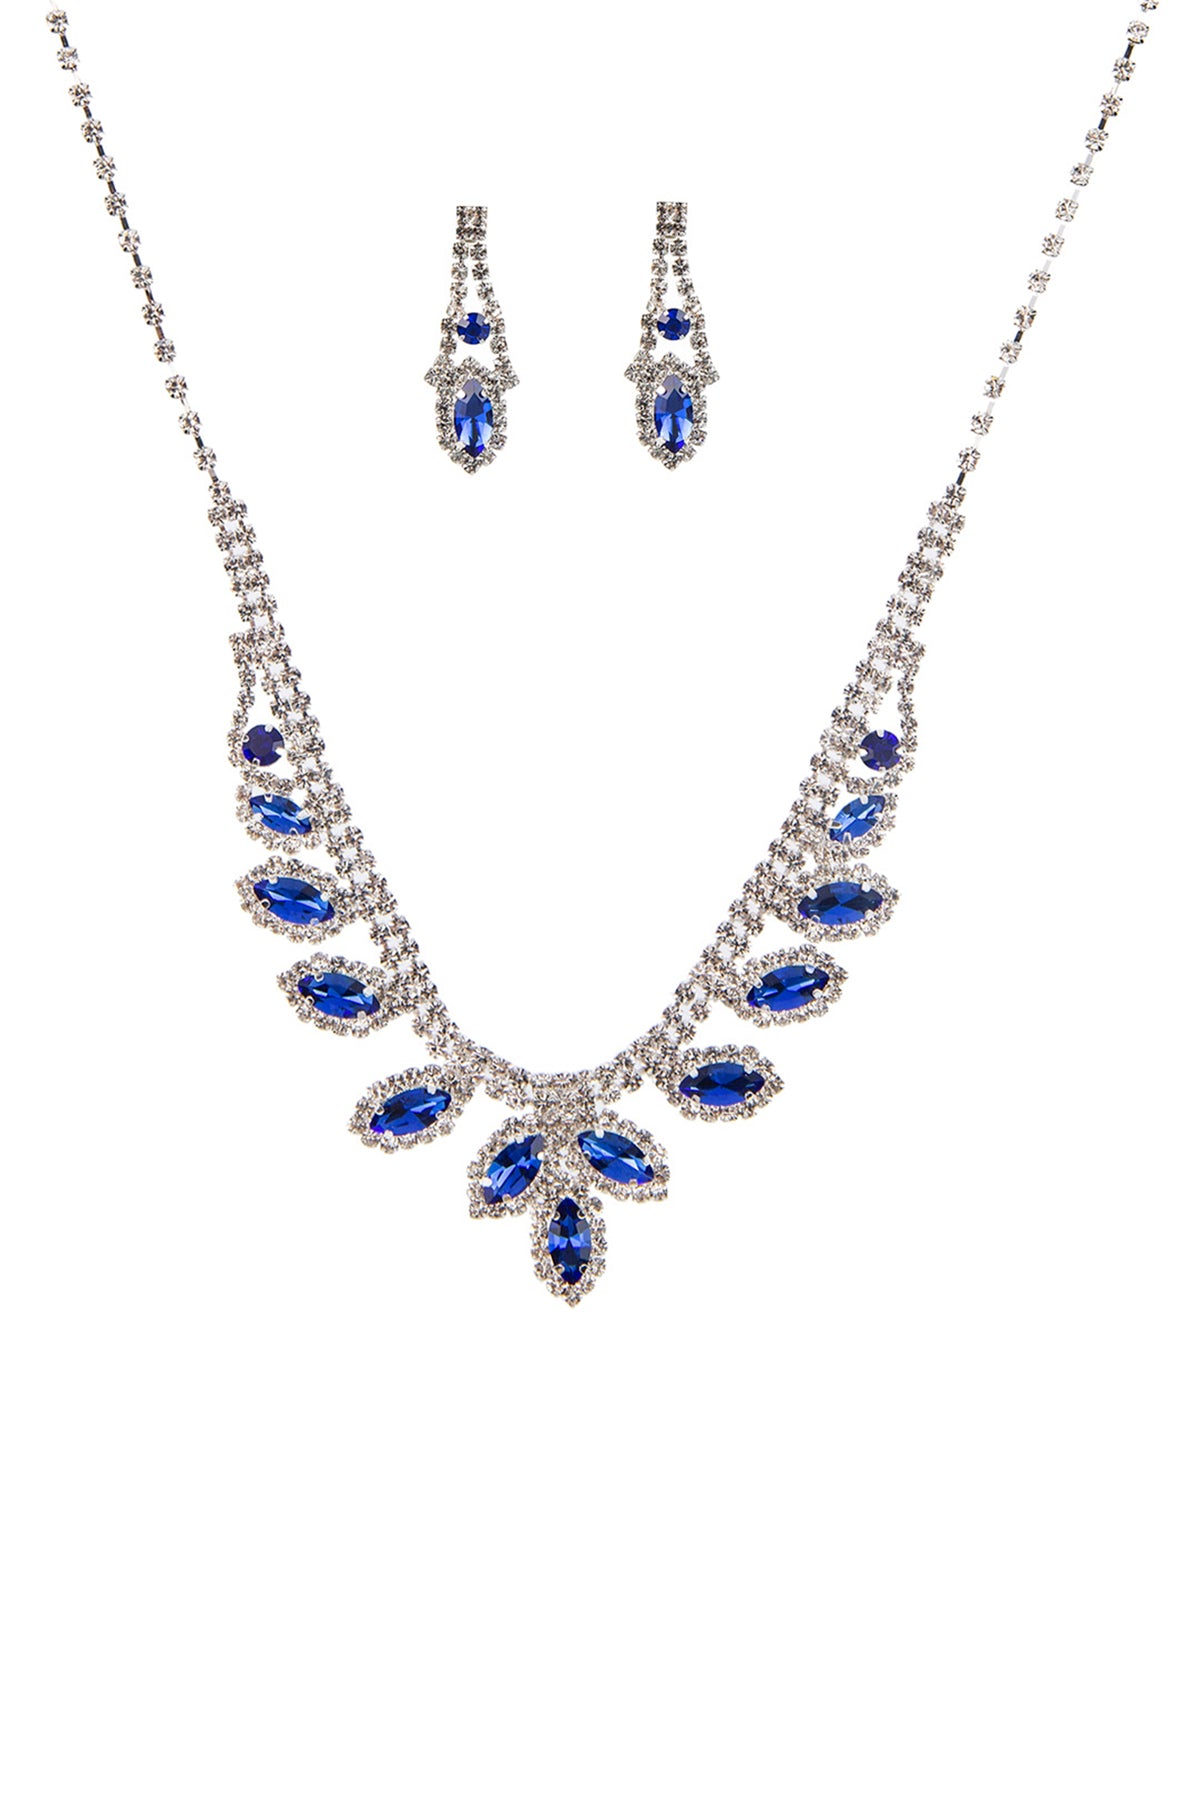 Rhinestone Marquise Wedding Necklace And Earring Set | Black, Blue, CCPRODUCTS, Gold, JEWELRY, NECKLACES, Red, SALE, SALE JEWELRY, Silver | Style Your Curves